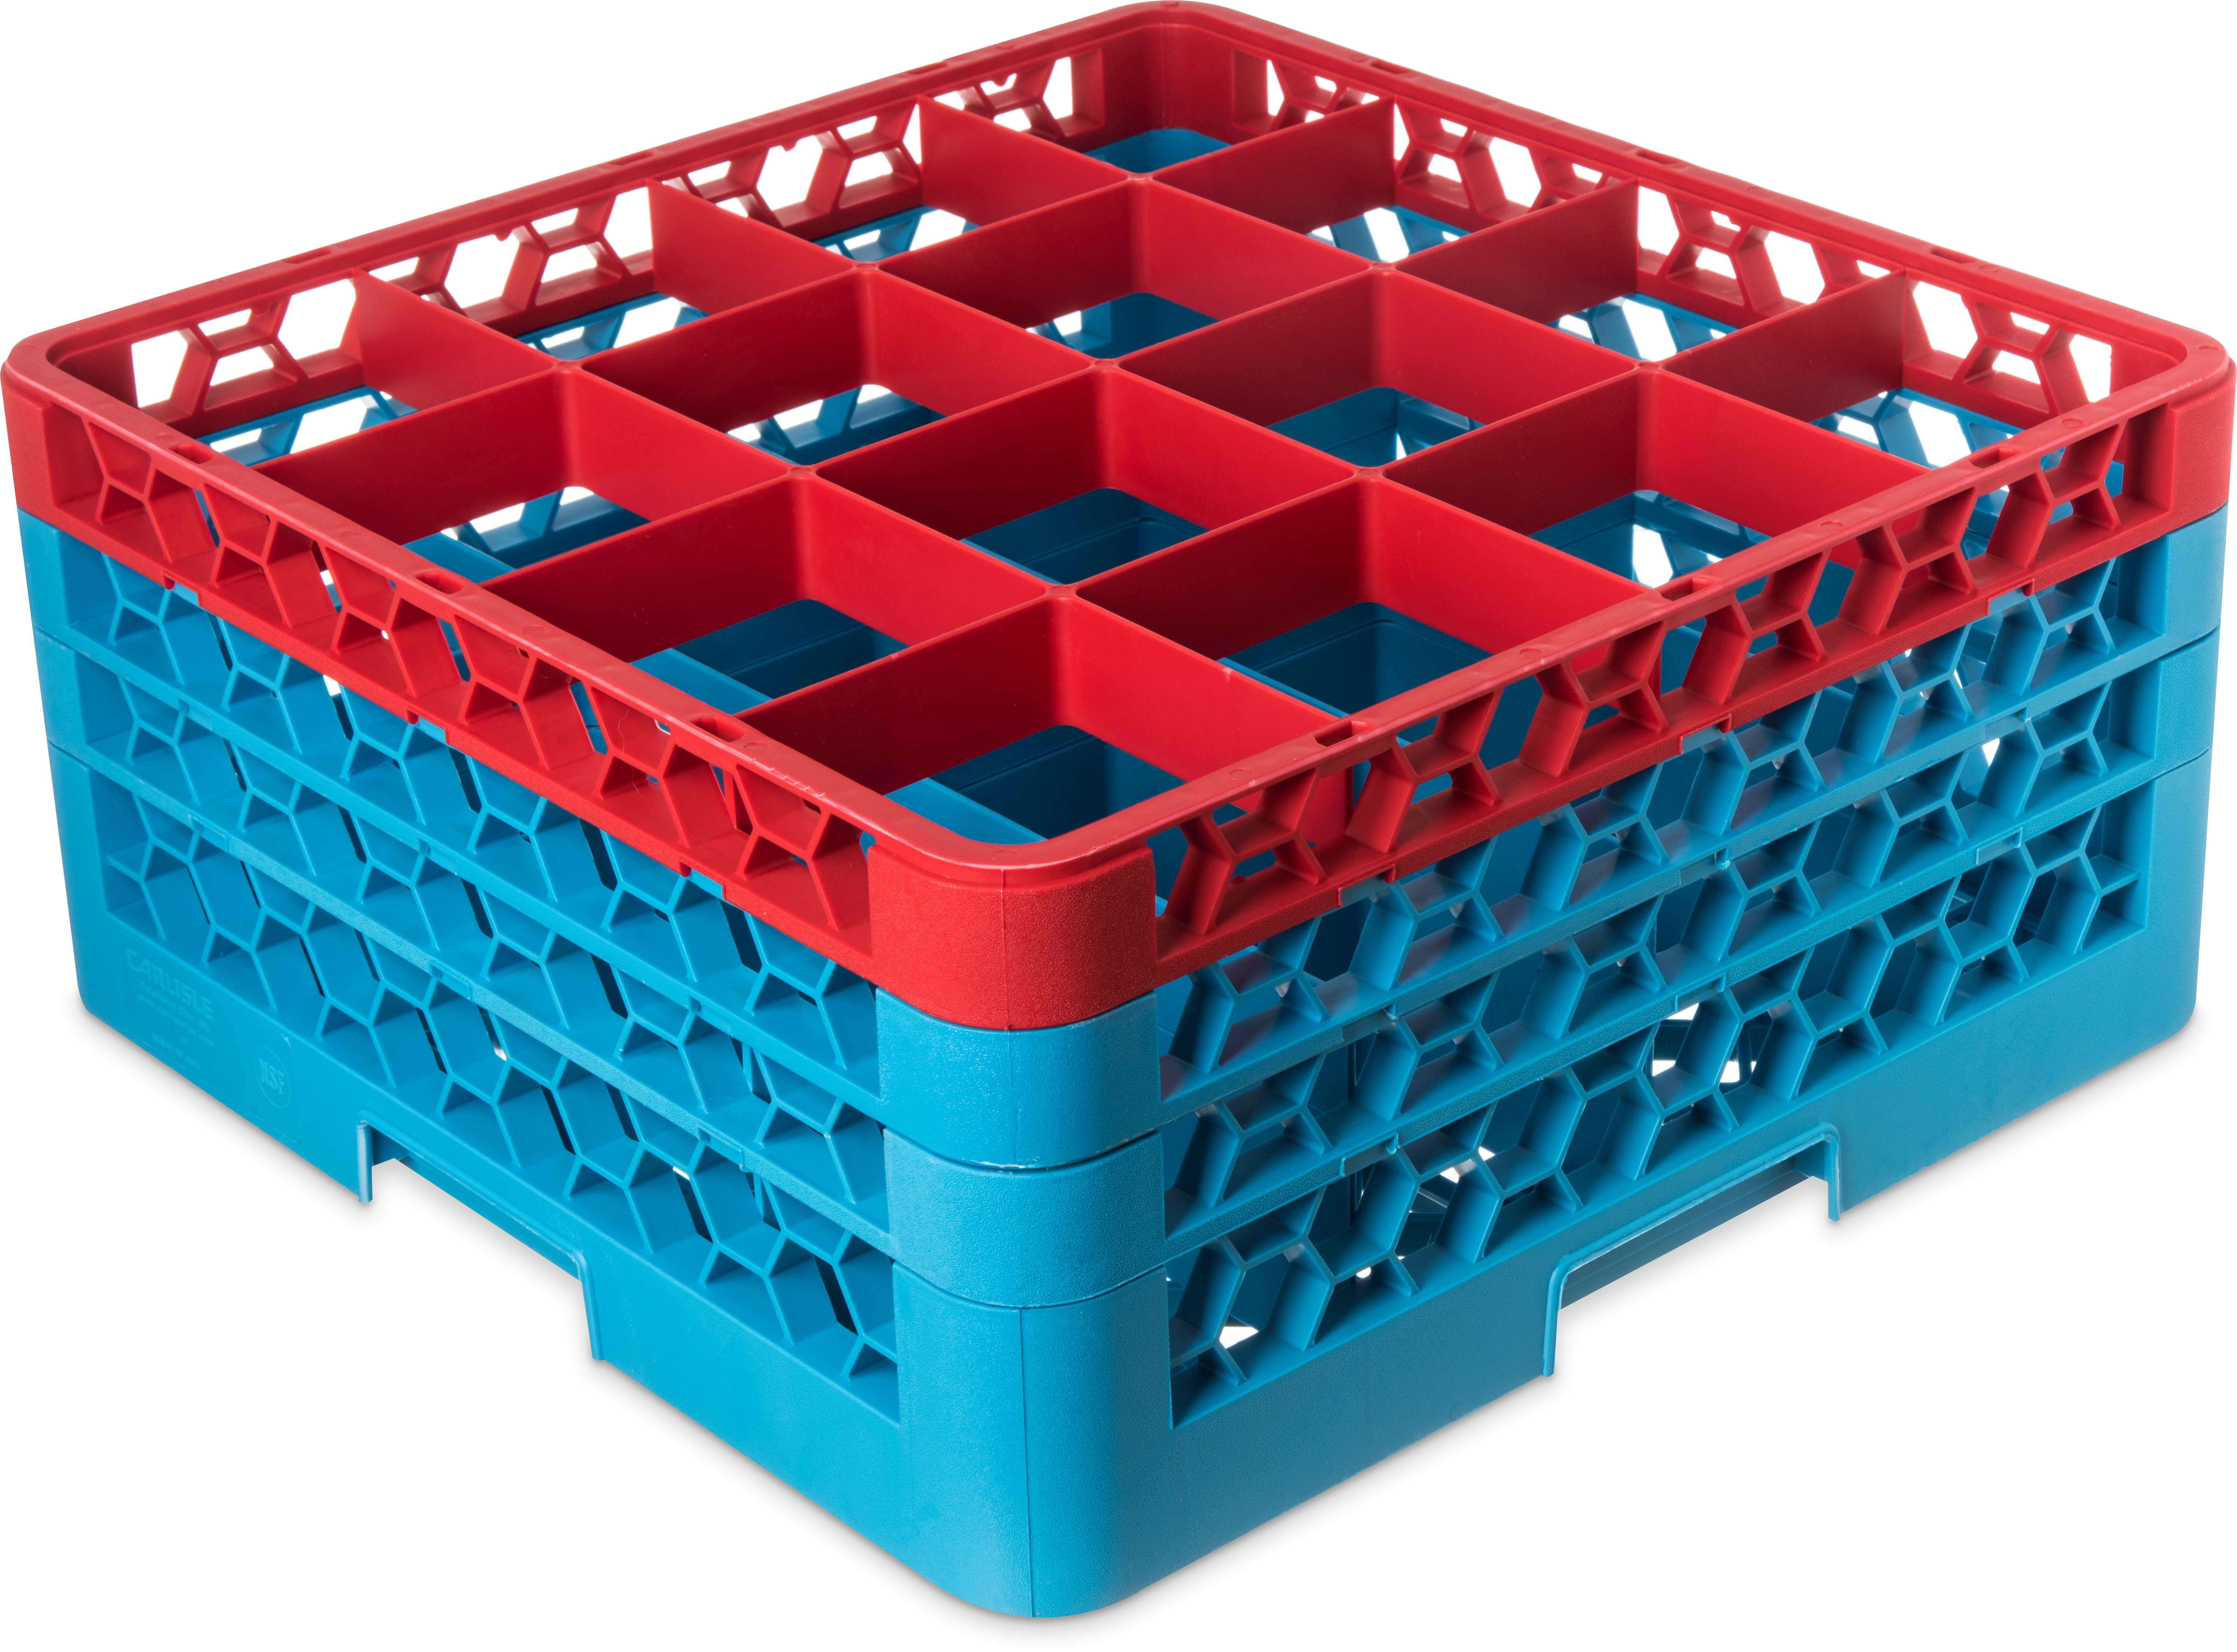 OptiClean 16 Compartment Glass Rack with 3 Extenders 8.72 - Red-Carlisle Blue